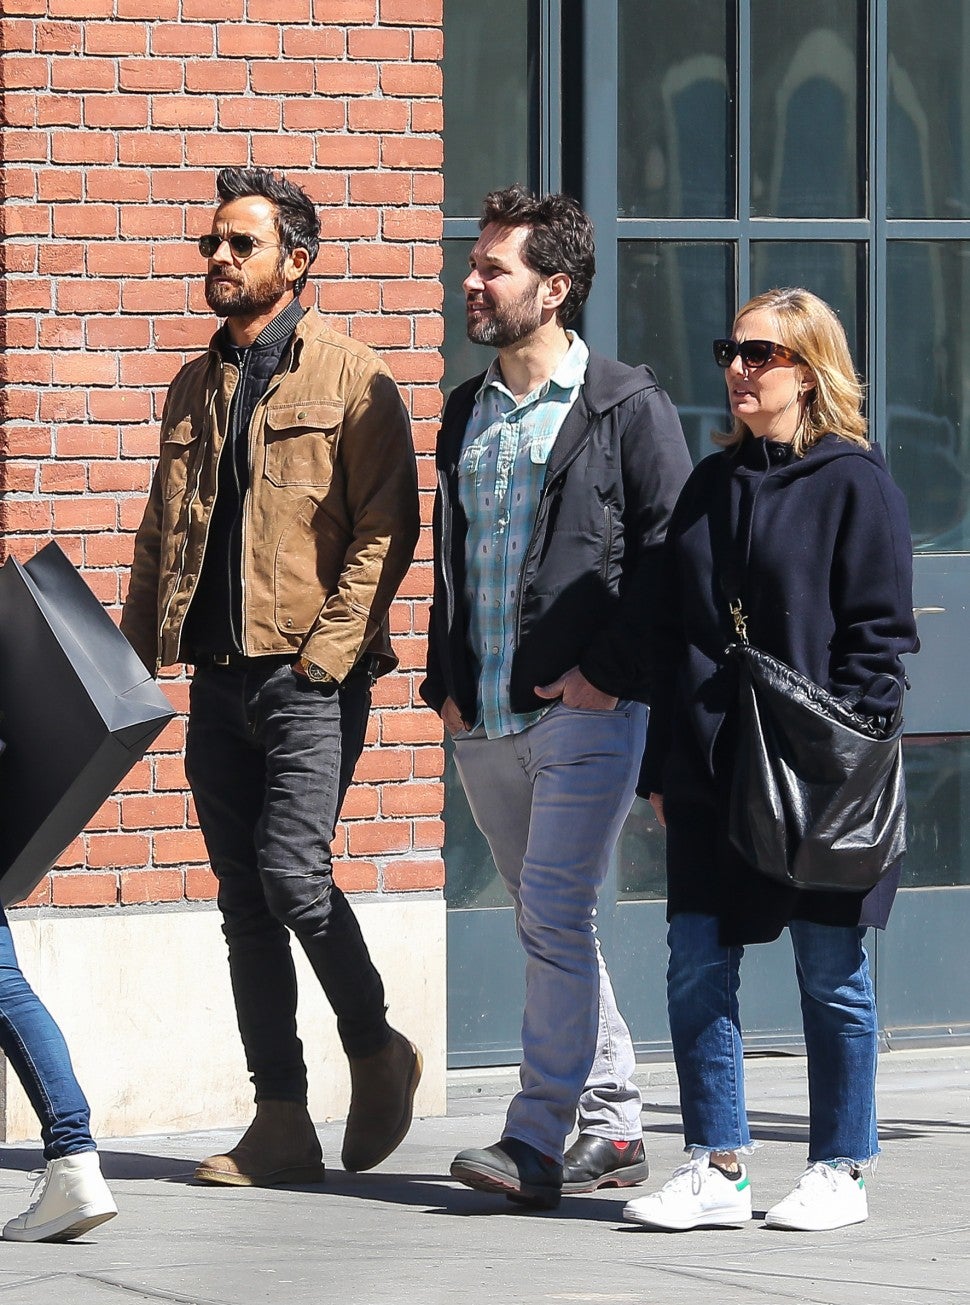 Justin Theroux walks with Paul Rudd and his wife in NYC on Easter Sunday.